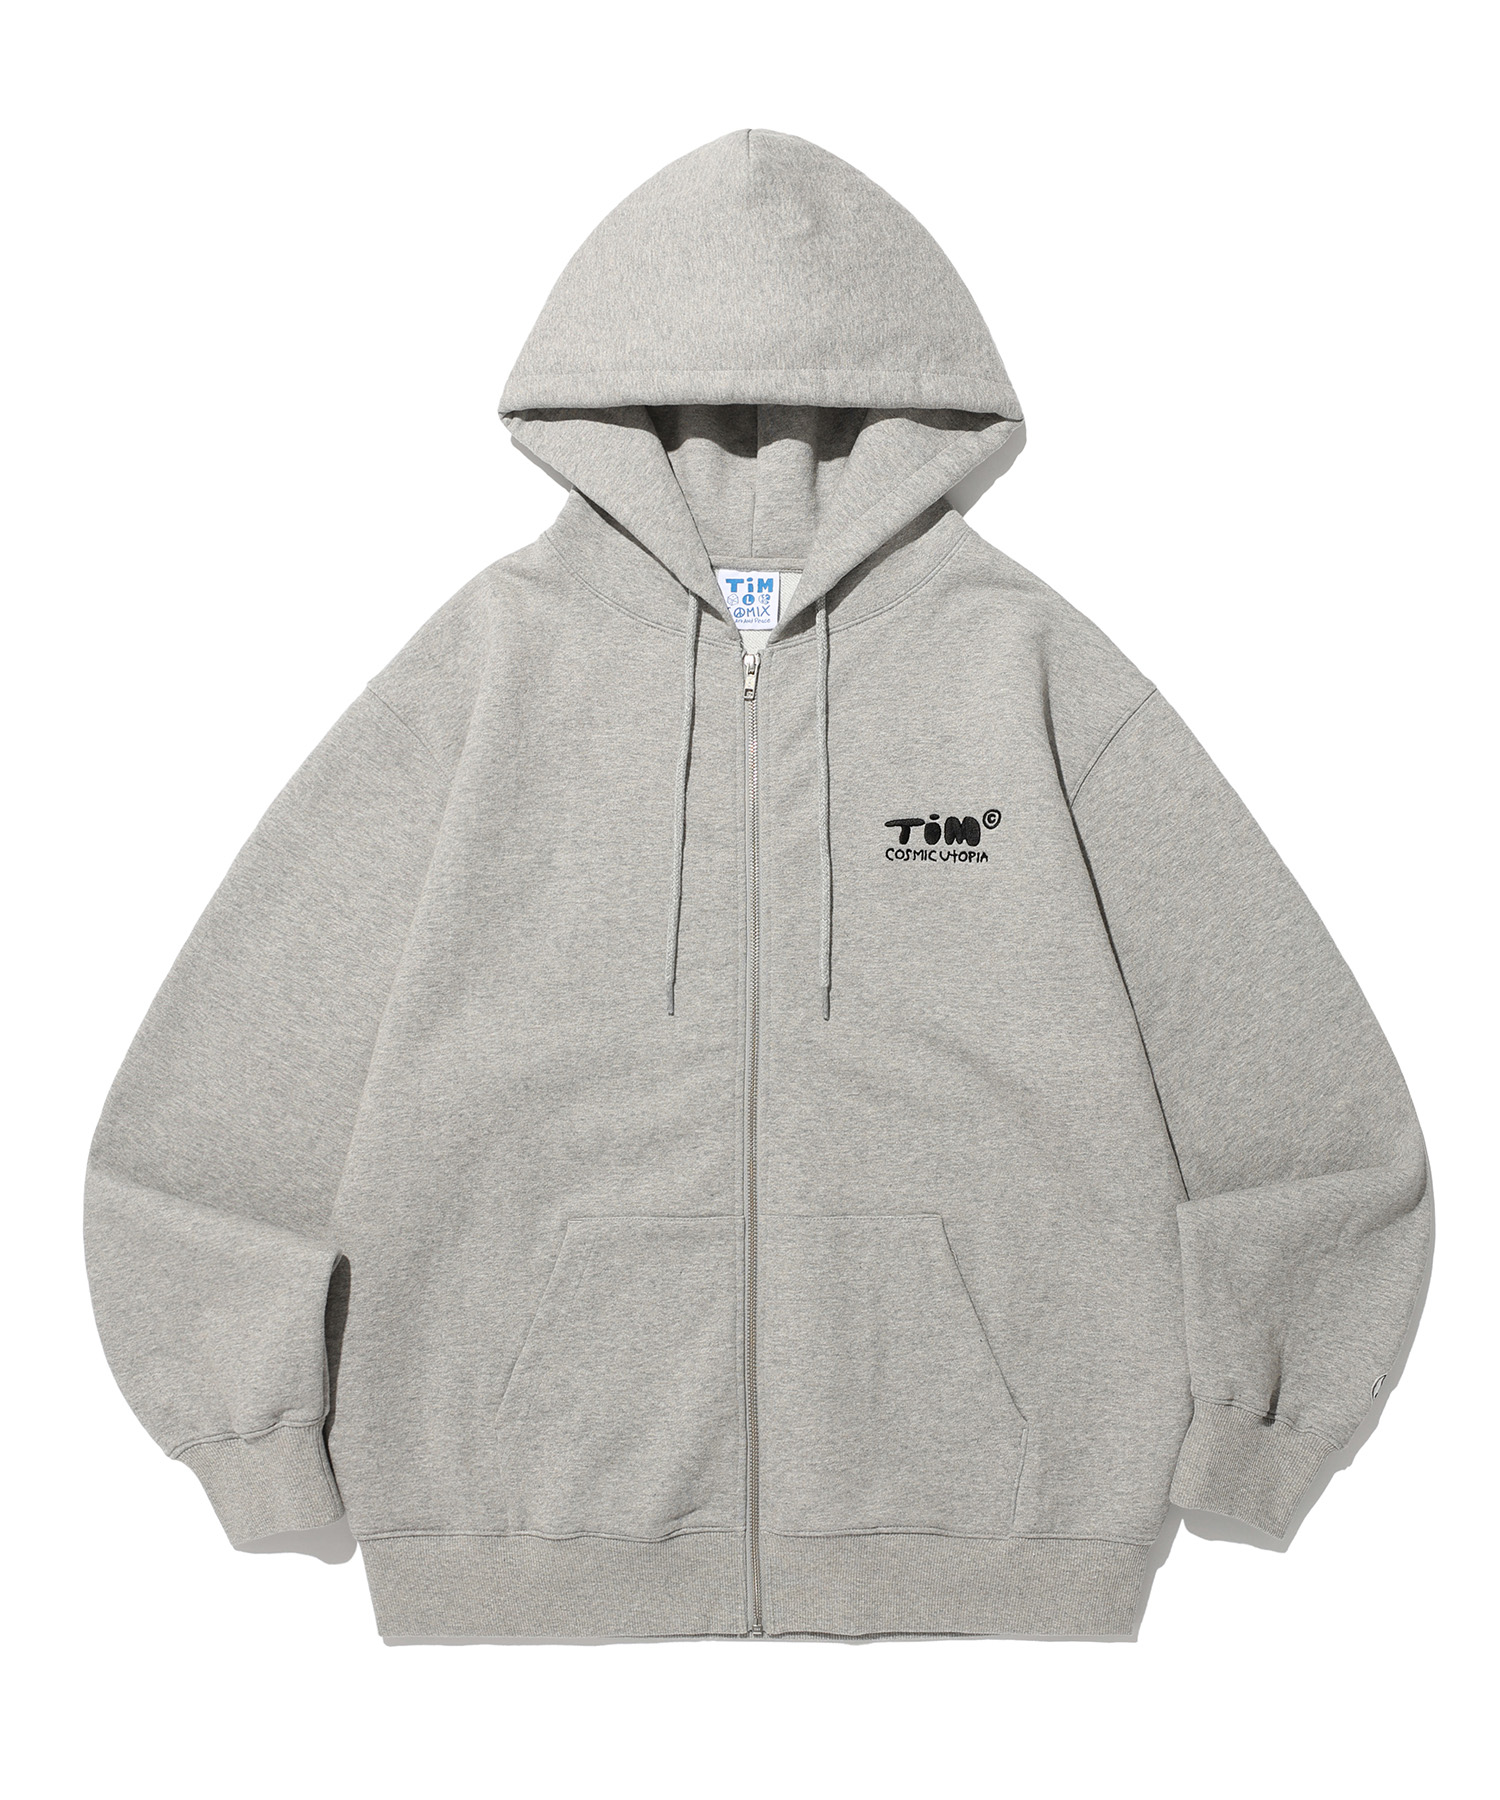 TIM ROUNDED TYPO HOODIE ZIP UP GRAY